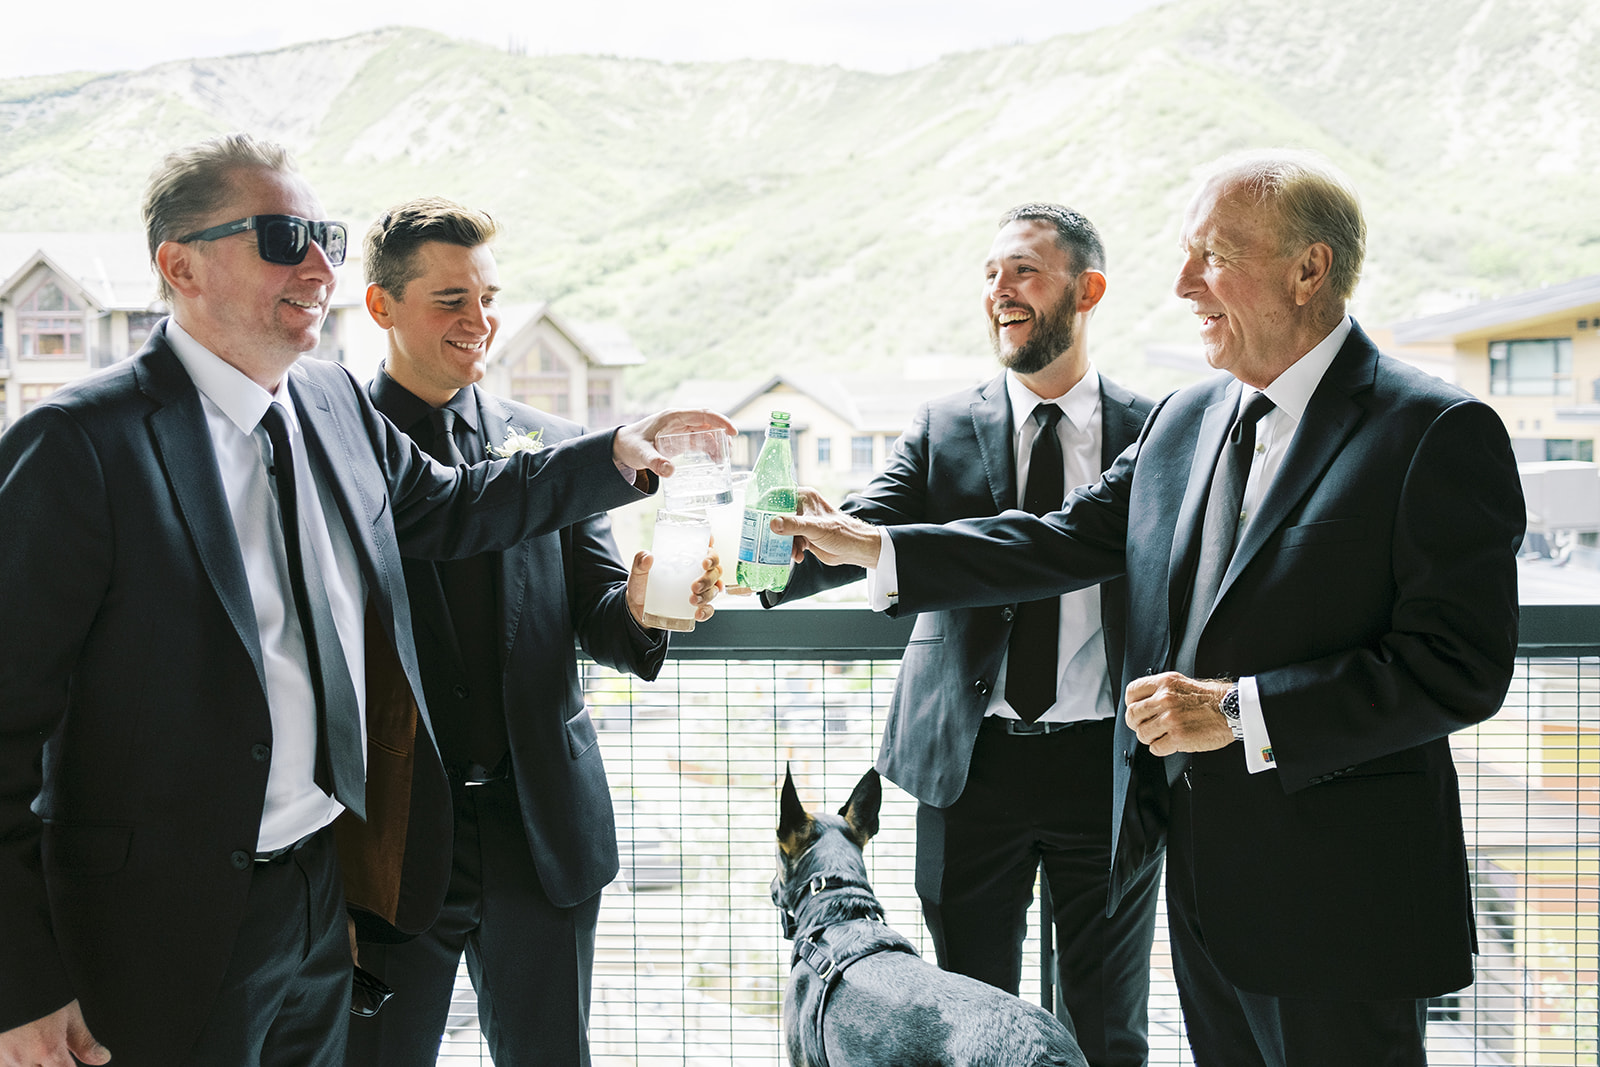 Men in suits giving a cheers with glasses